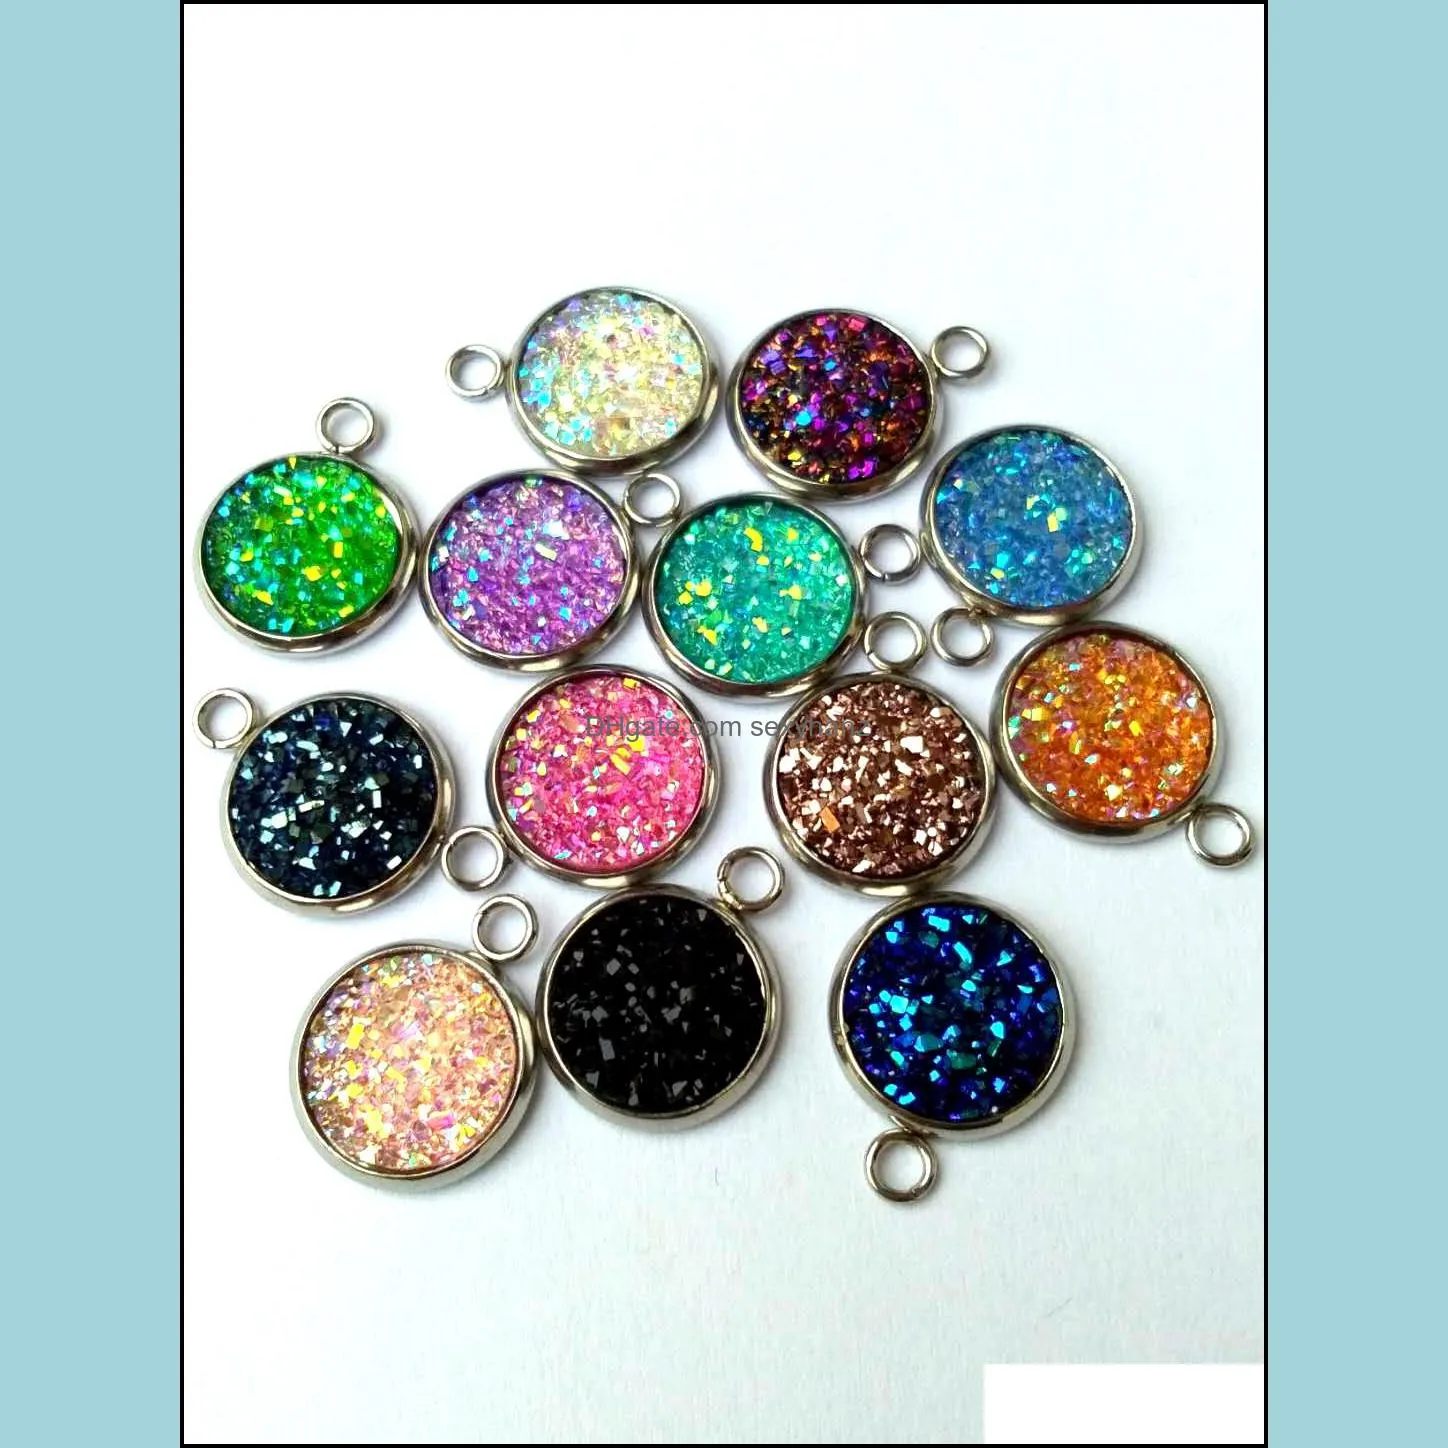 Nice druzy Design Heart Big Hole Spacer Beads 50pcs lot stainless steel Fit Charm Bracelet Jewelry DIY Metals Loose Beads NMK-1